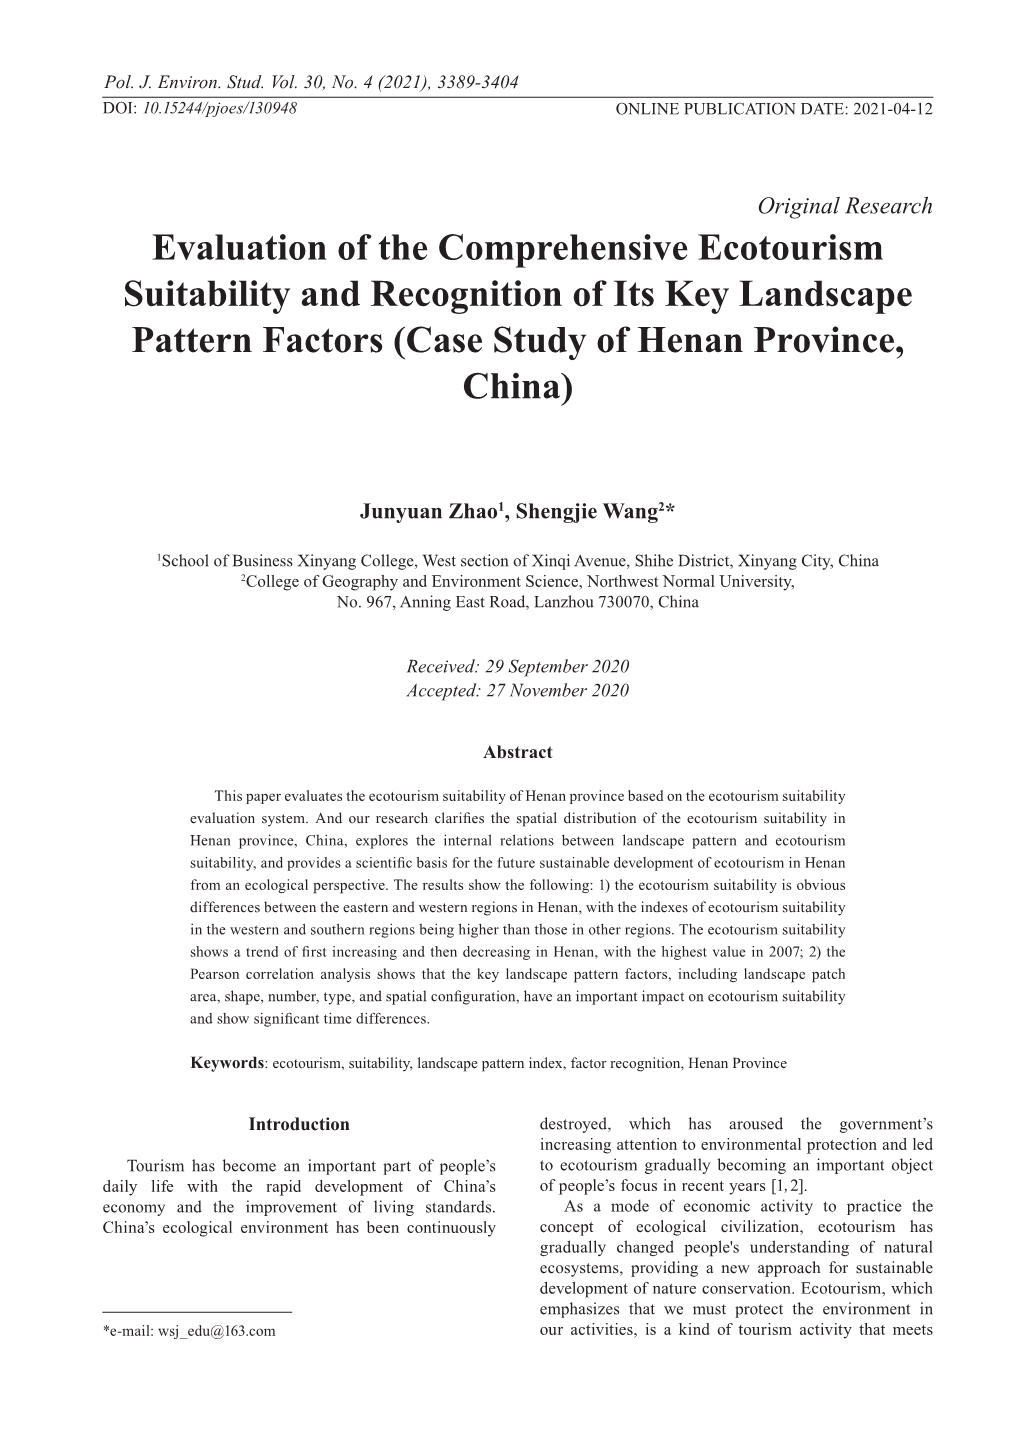 Evaluation of the Comprehensive Ecotourism Suitability and Recognition of Its Key Landscape Pattern Factors (Case Study of Henan Province, China)